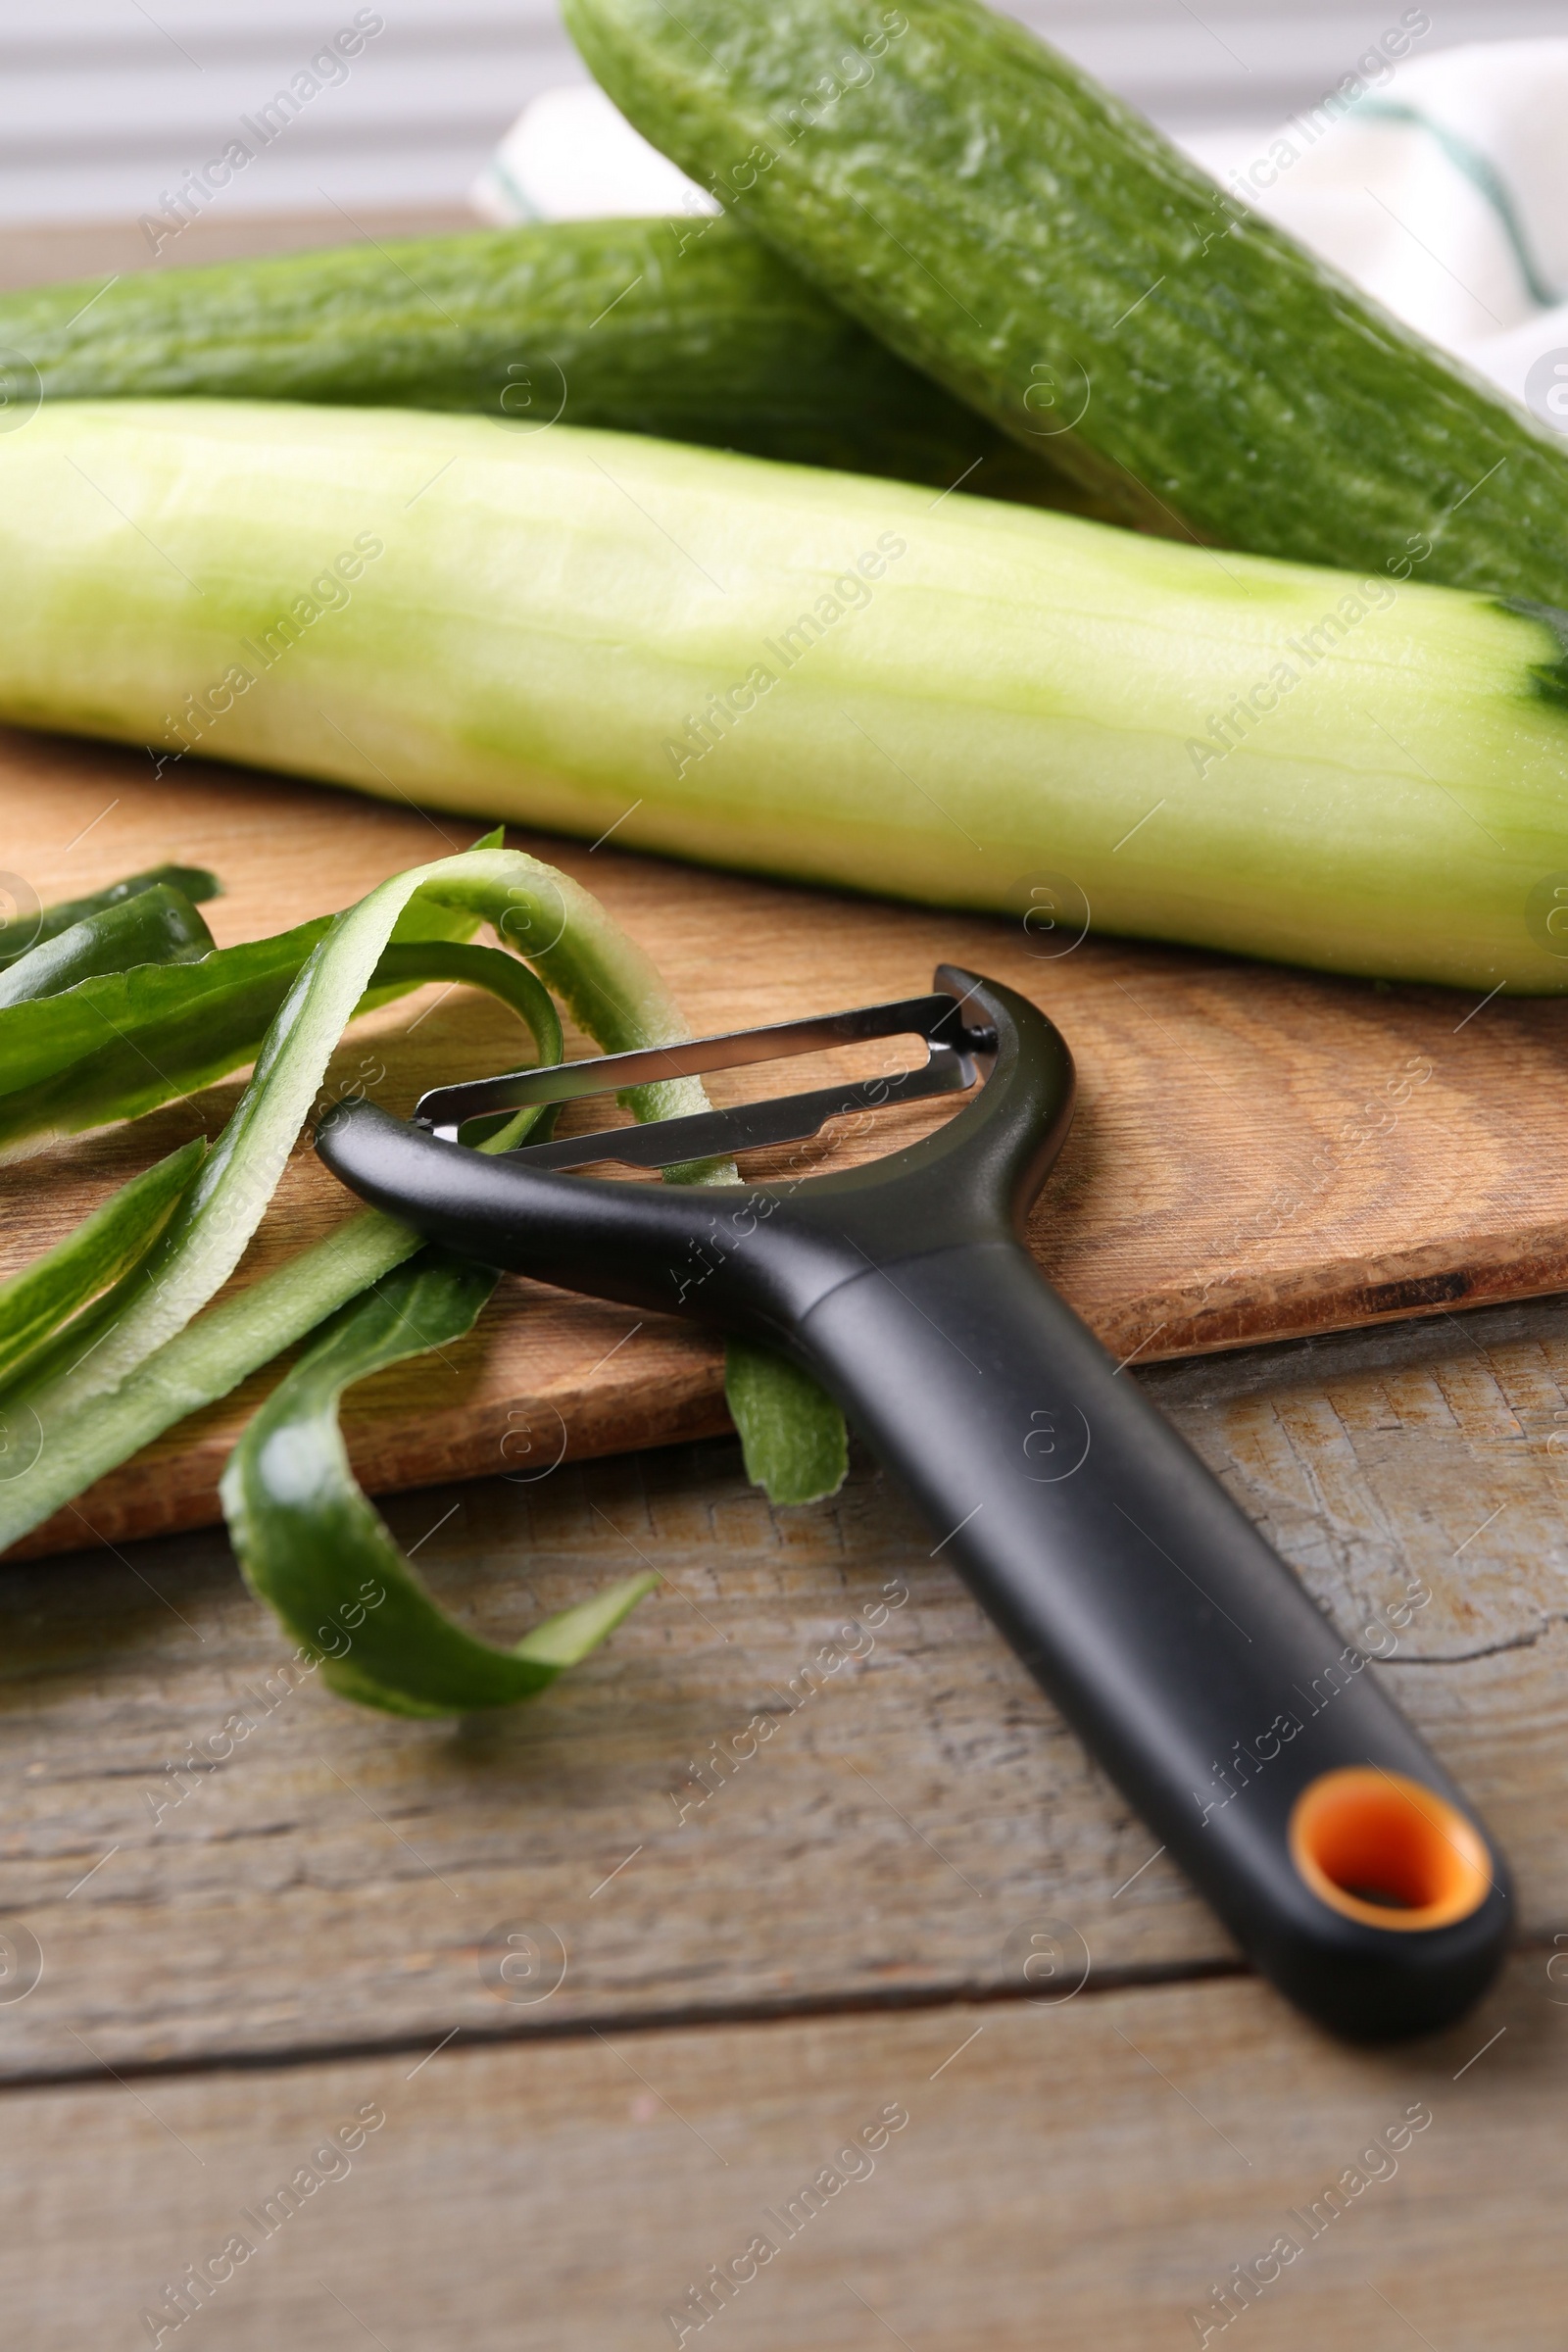 Photo of Fresh cucumbers, peels and peeler at wooden table